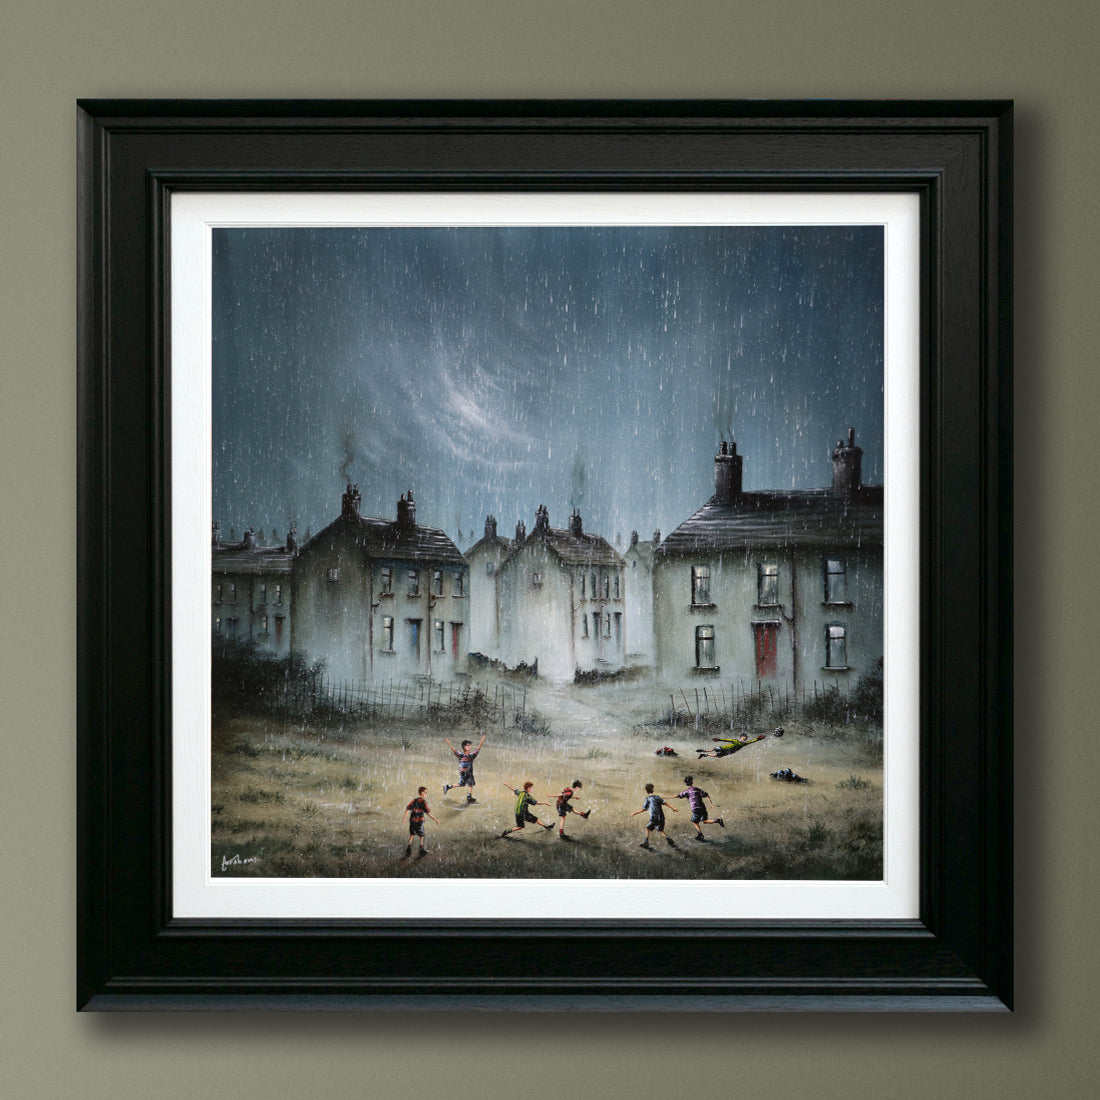 Danny Abrahams - 'Anyone that thinks sunshine is happiness has never played football in the rain!’  - Framed Original Art